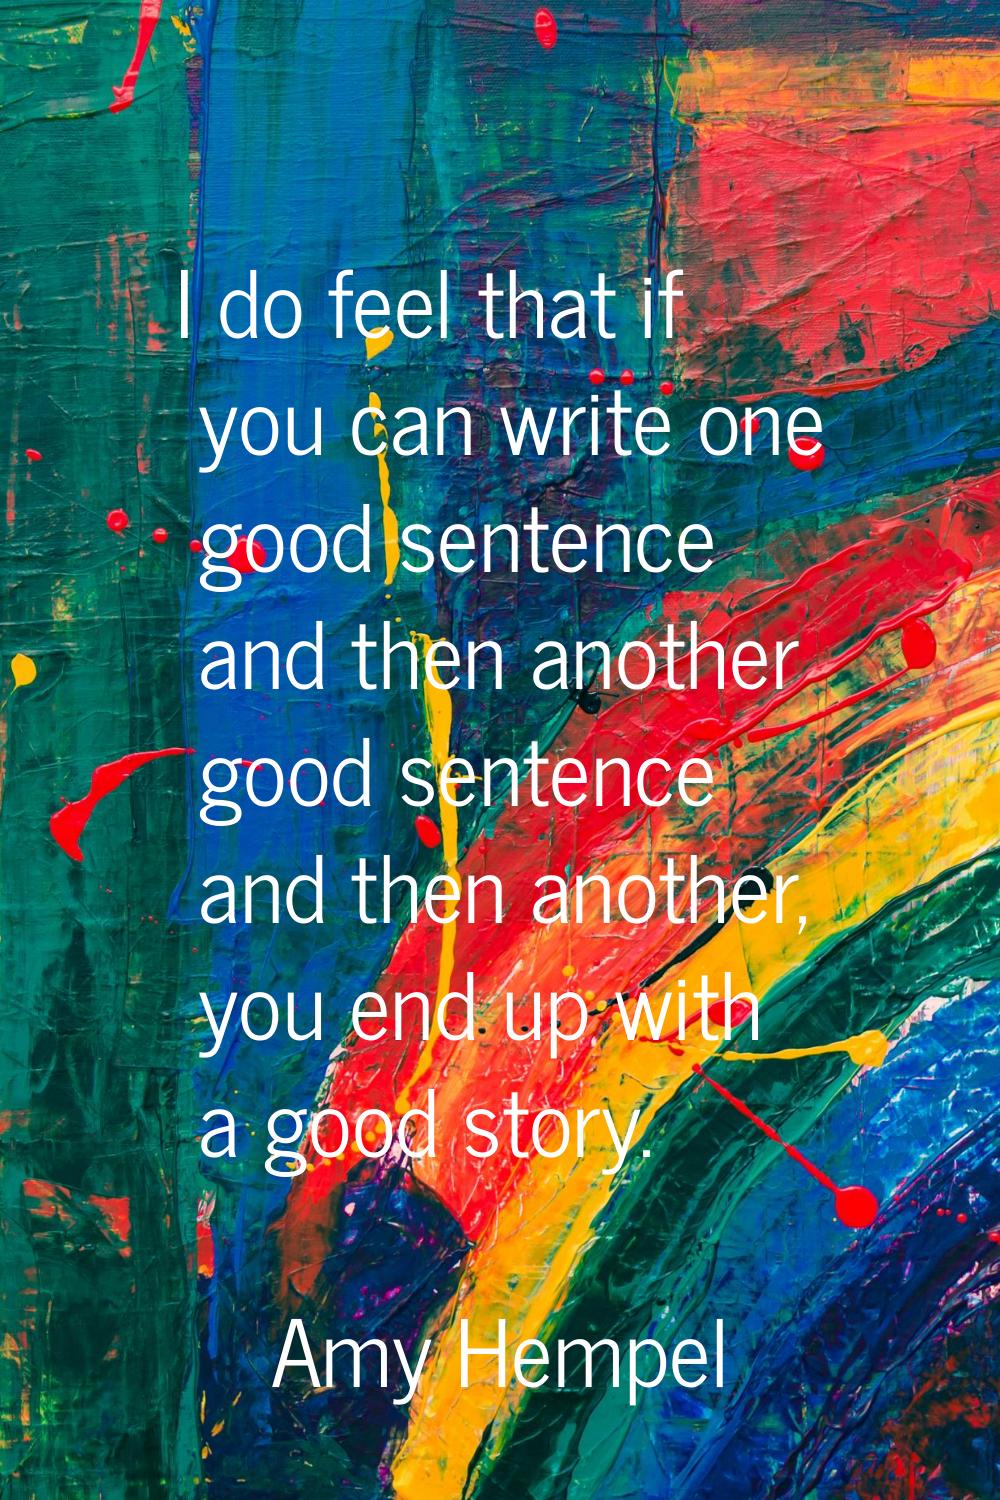 I do feel that if you can write one good sentence and then another good sentence and then another, 